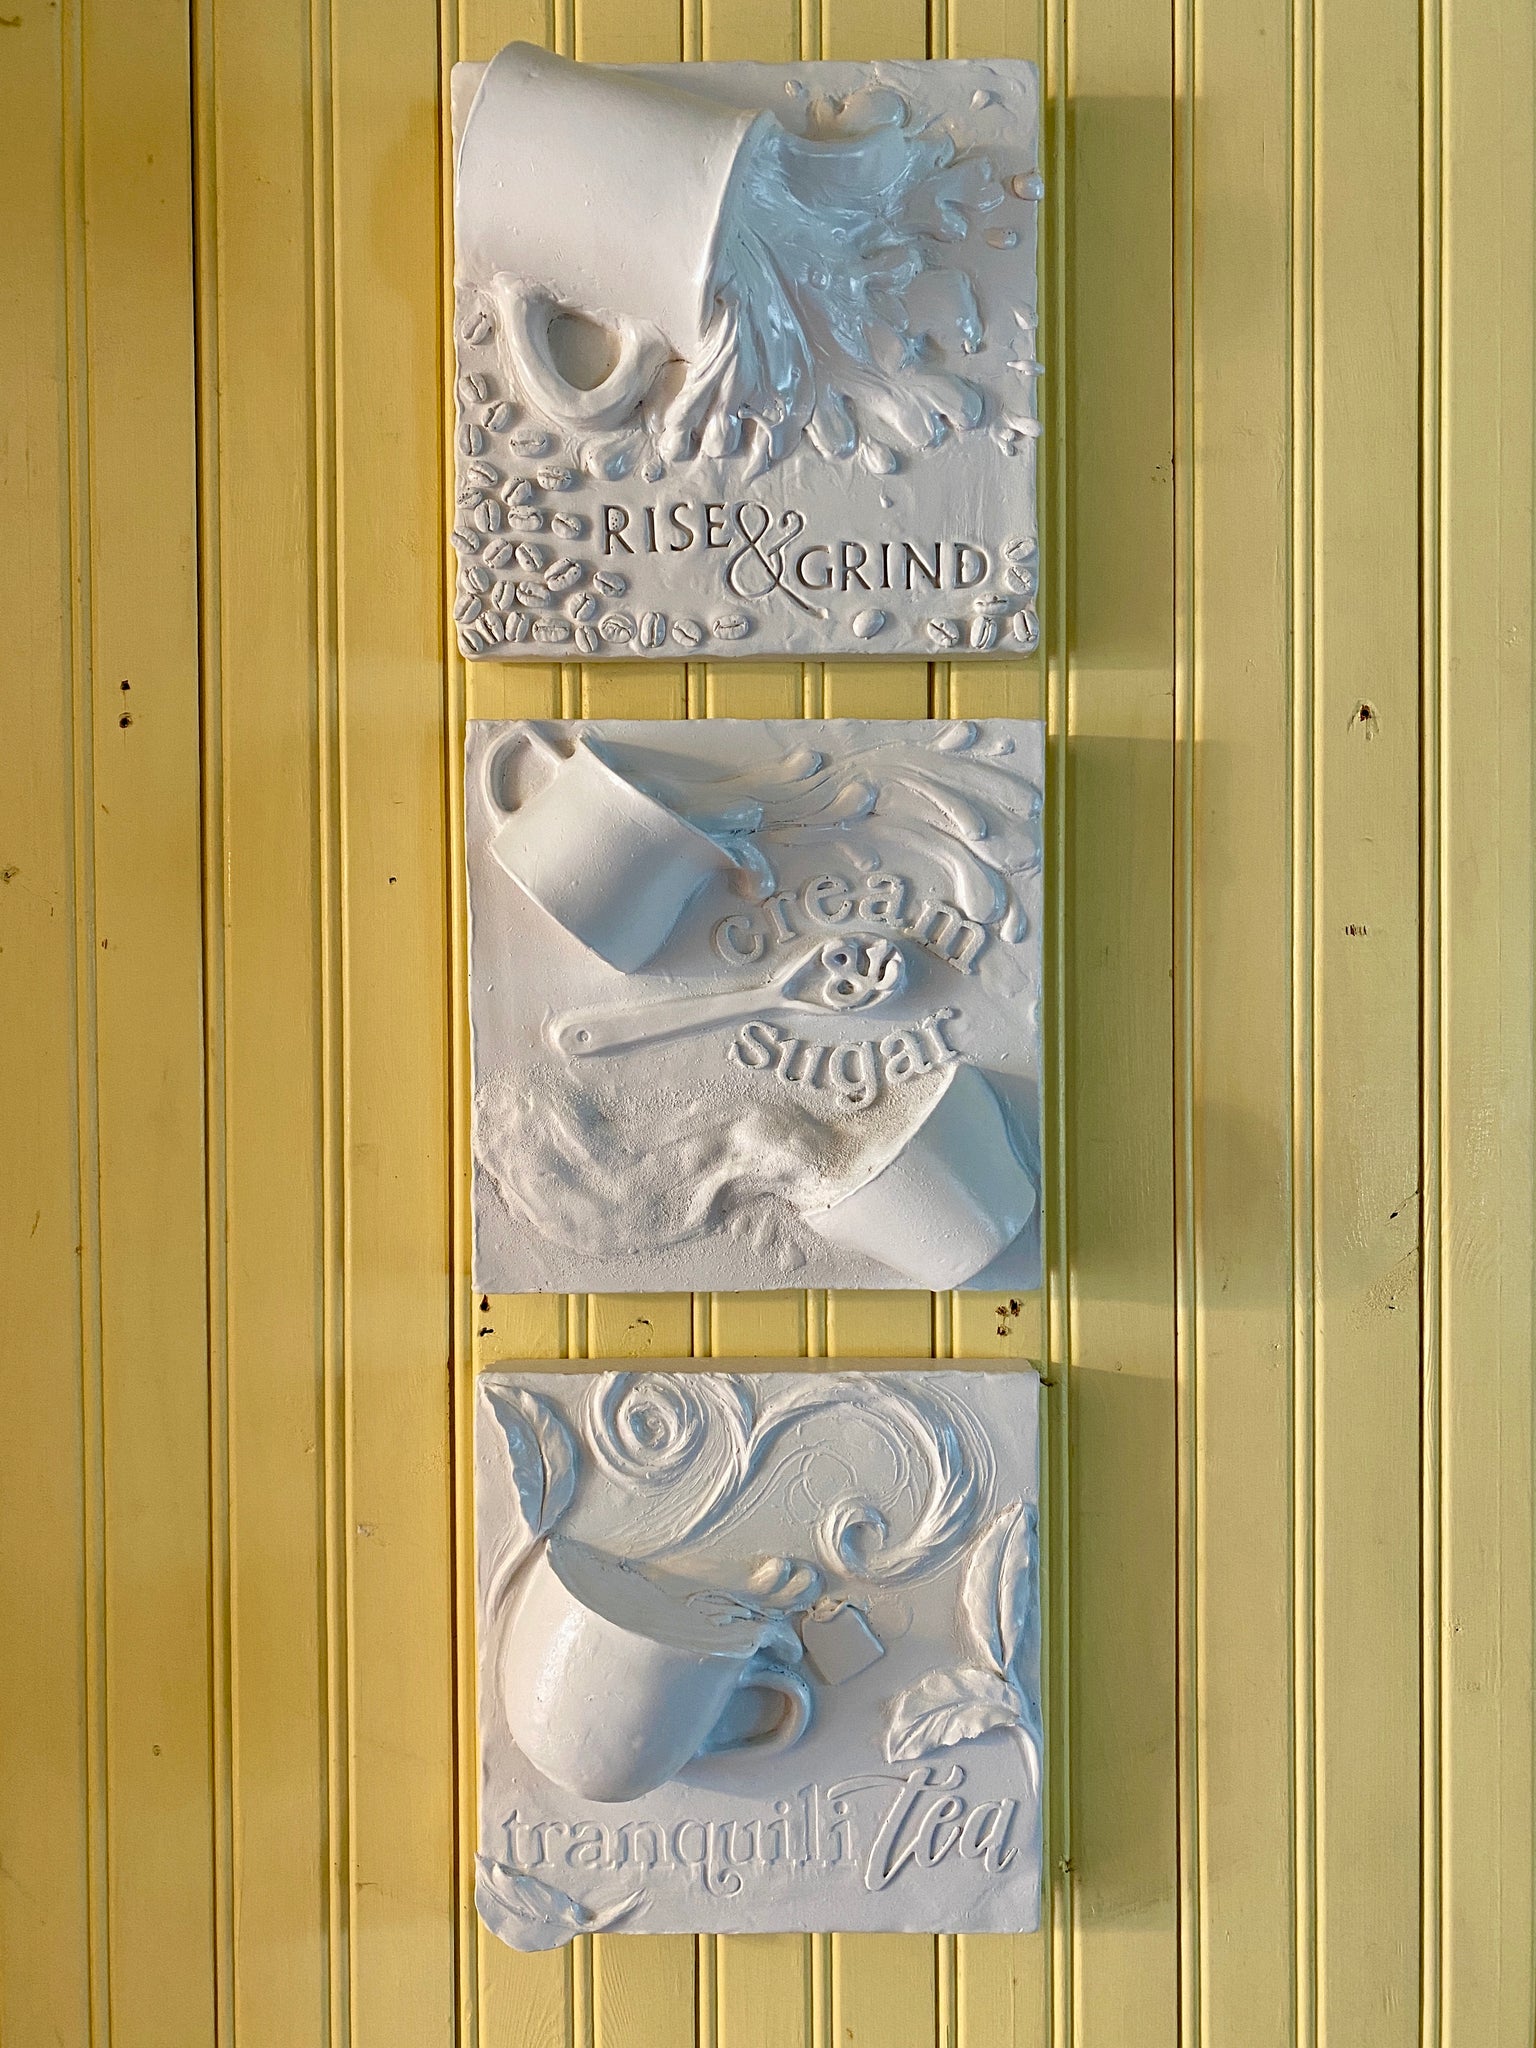 Coffee, Tea, Cream & Sugar Triptych Relief Wall Sculpture - Exclusive to The Sculpture Store